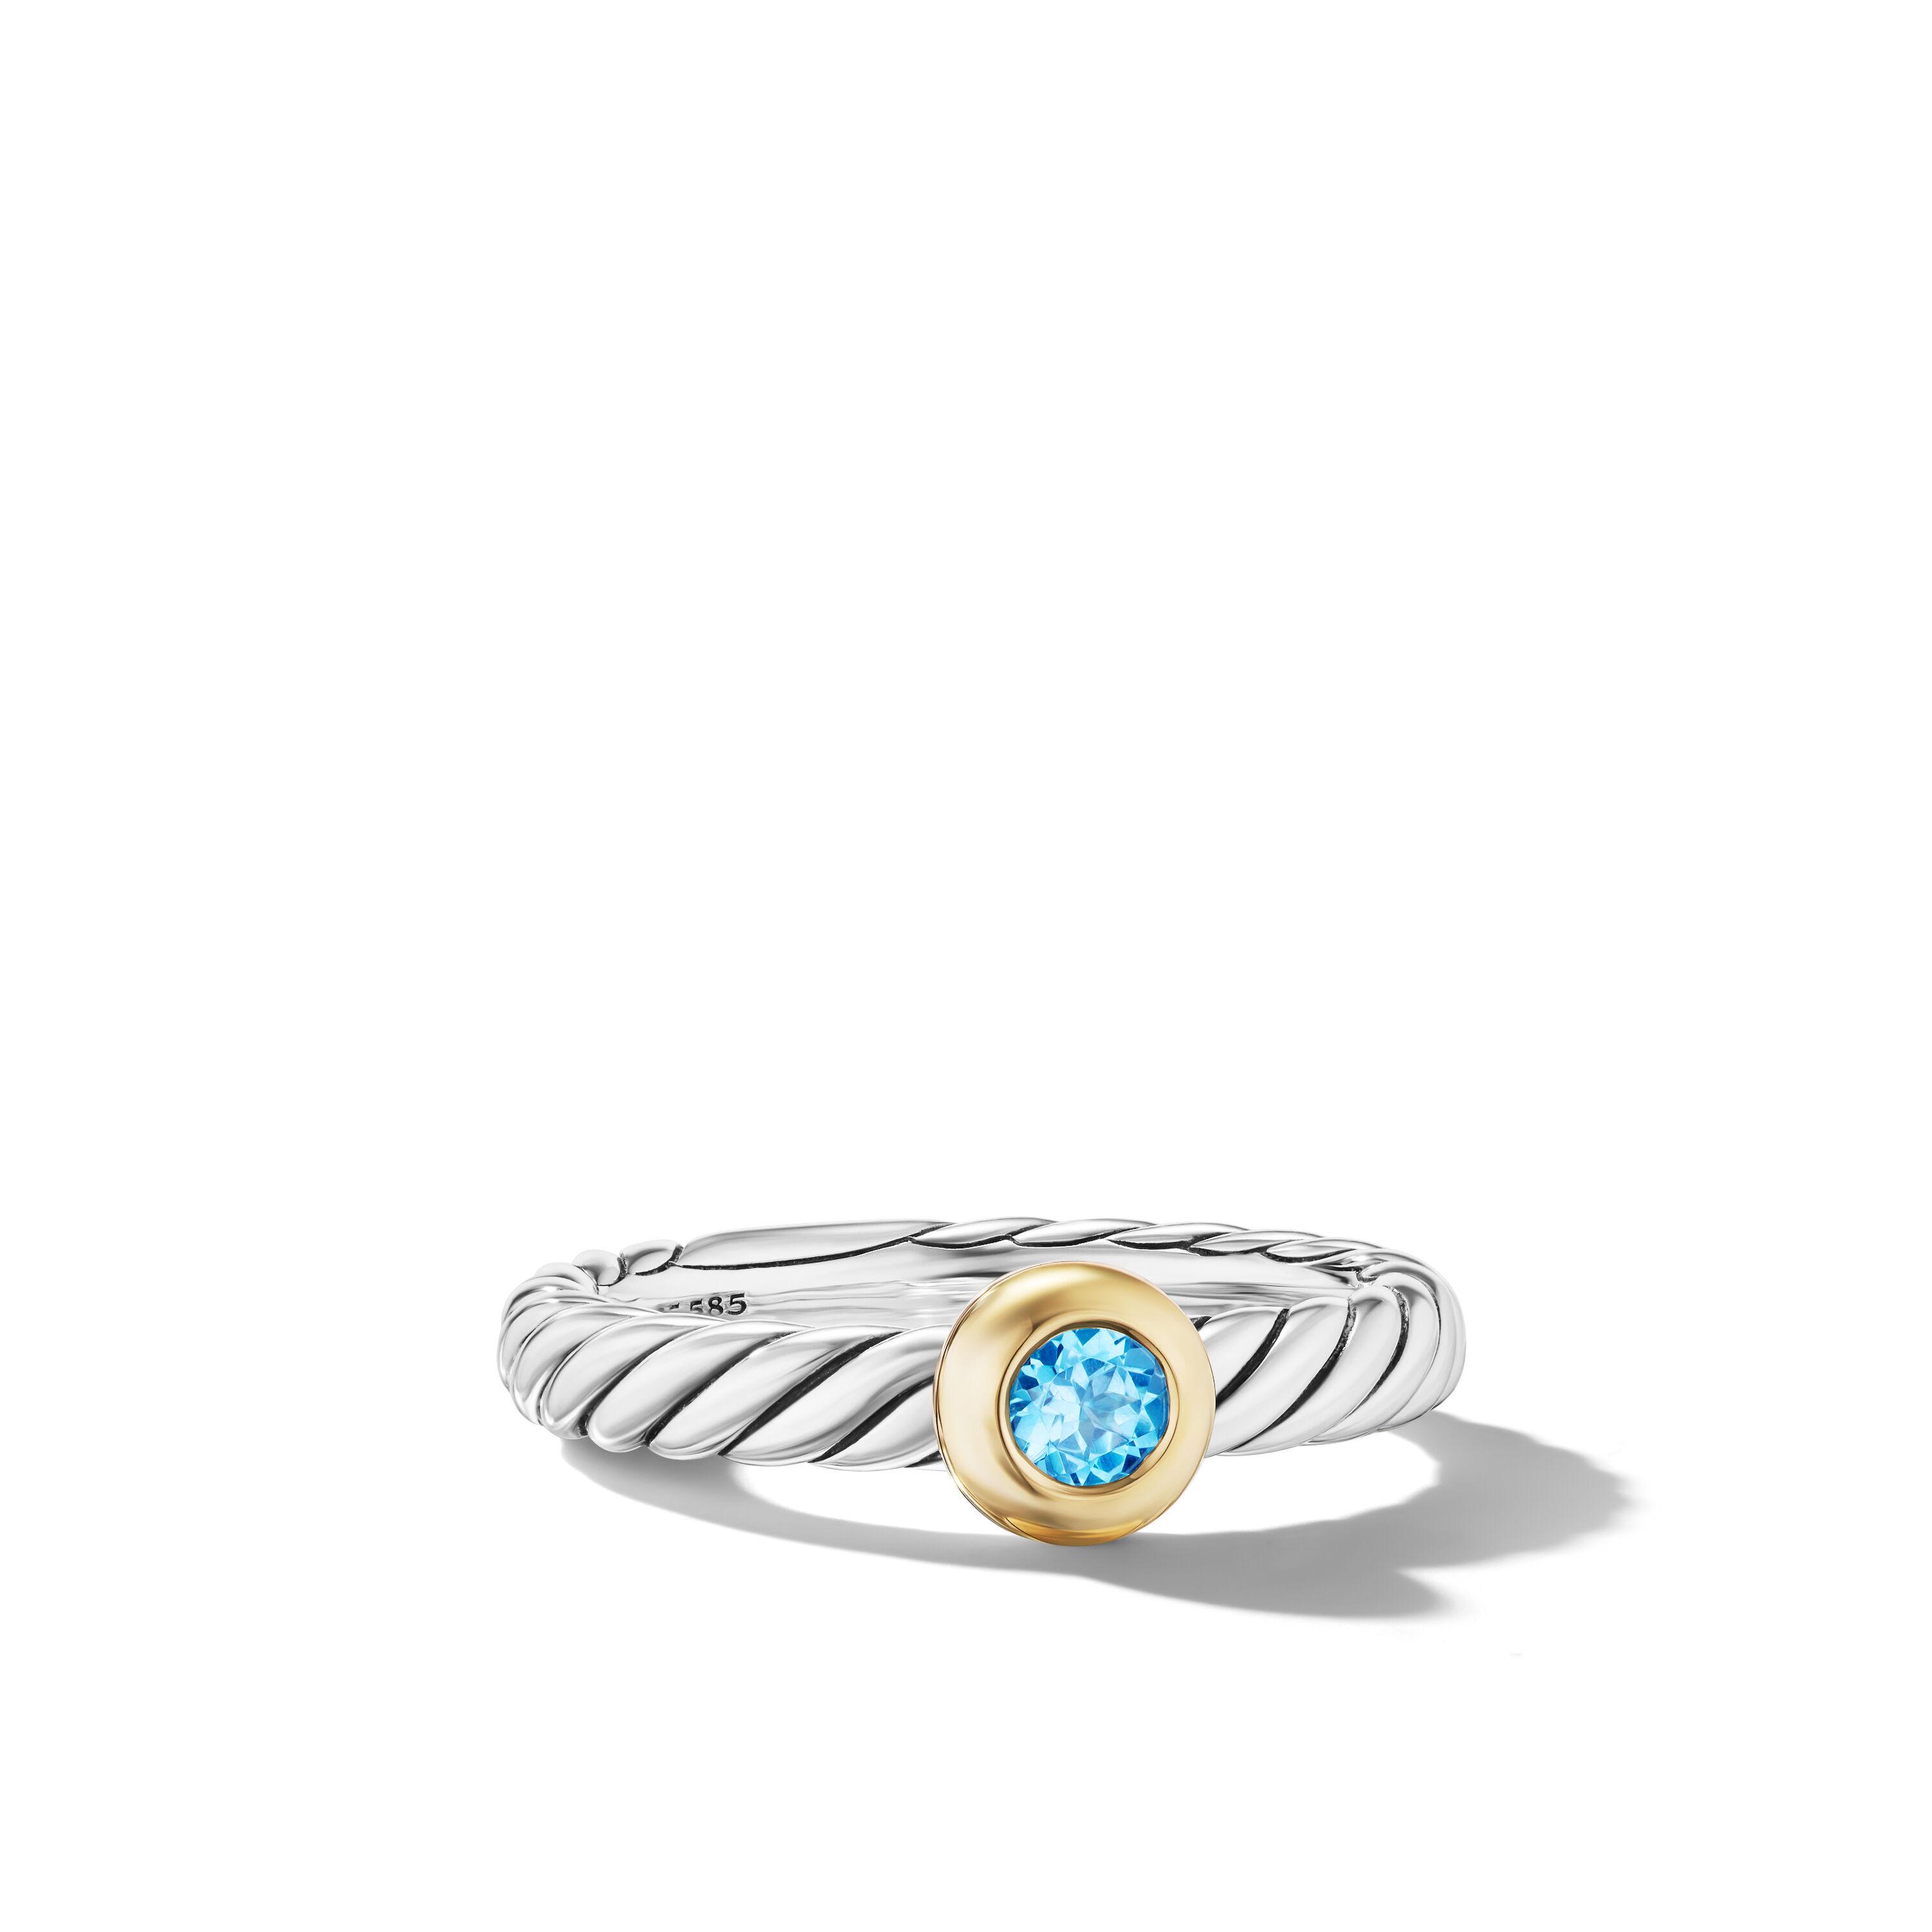 David Yurman Petite Cable Ring in Sterling Silver with 14K Yellow Gold and Blue Topaz, Size 6